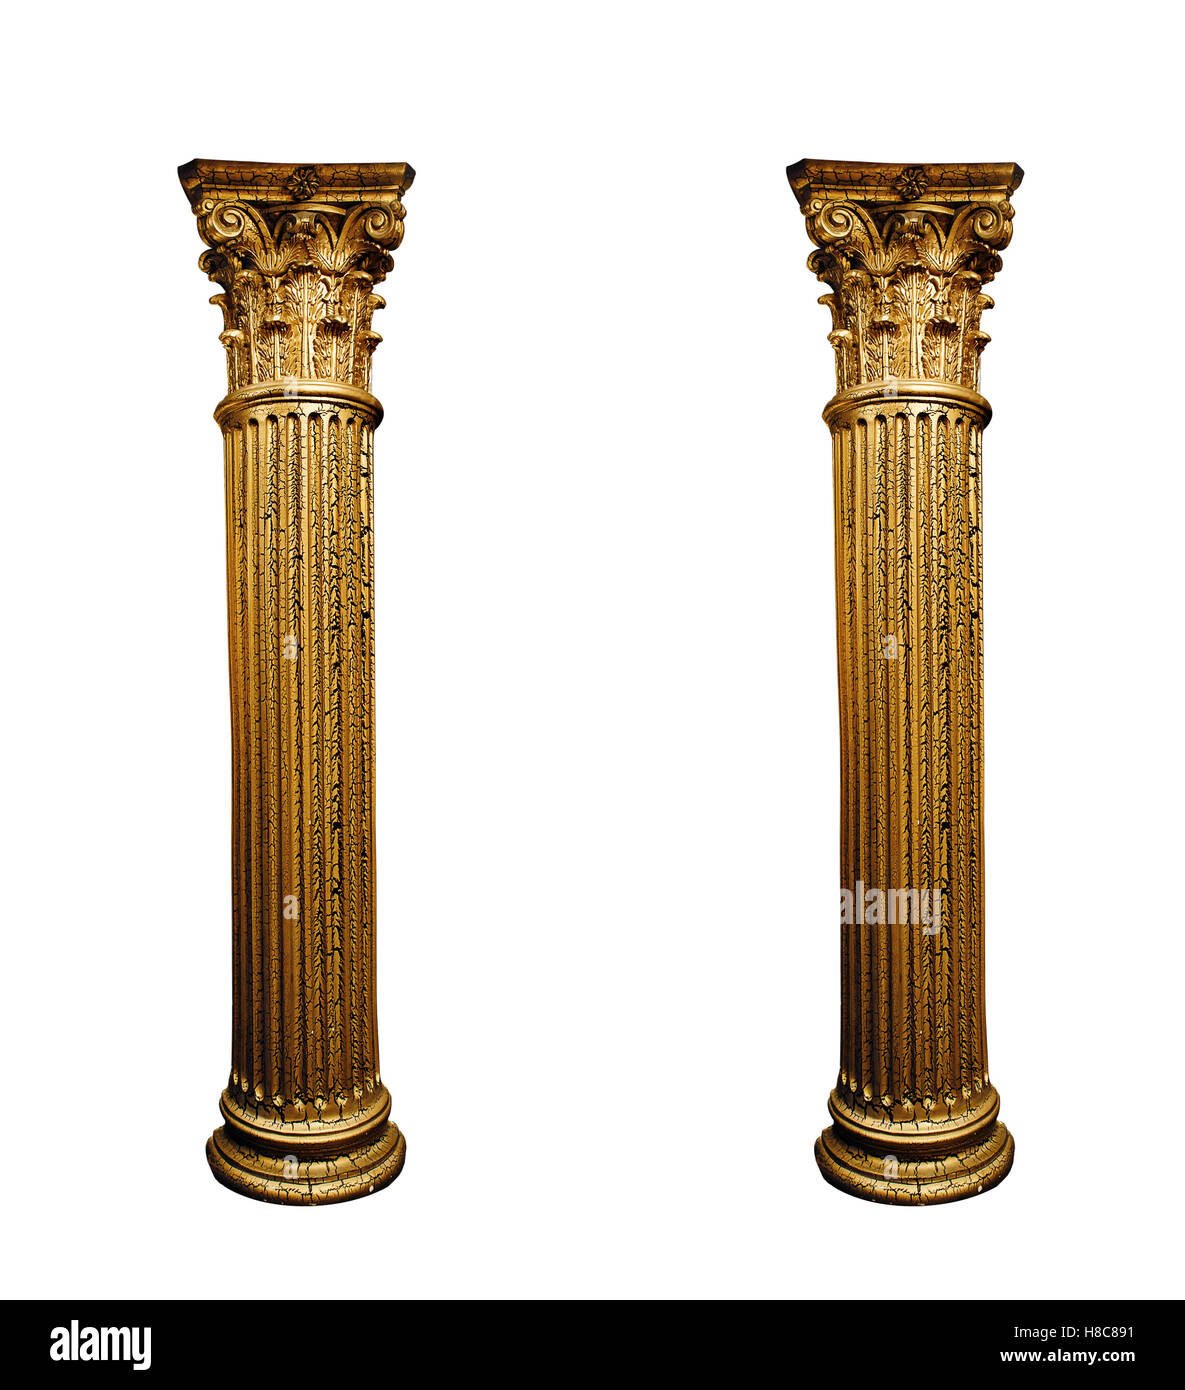 Two isolated architectural columns on a white background Stock Photo